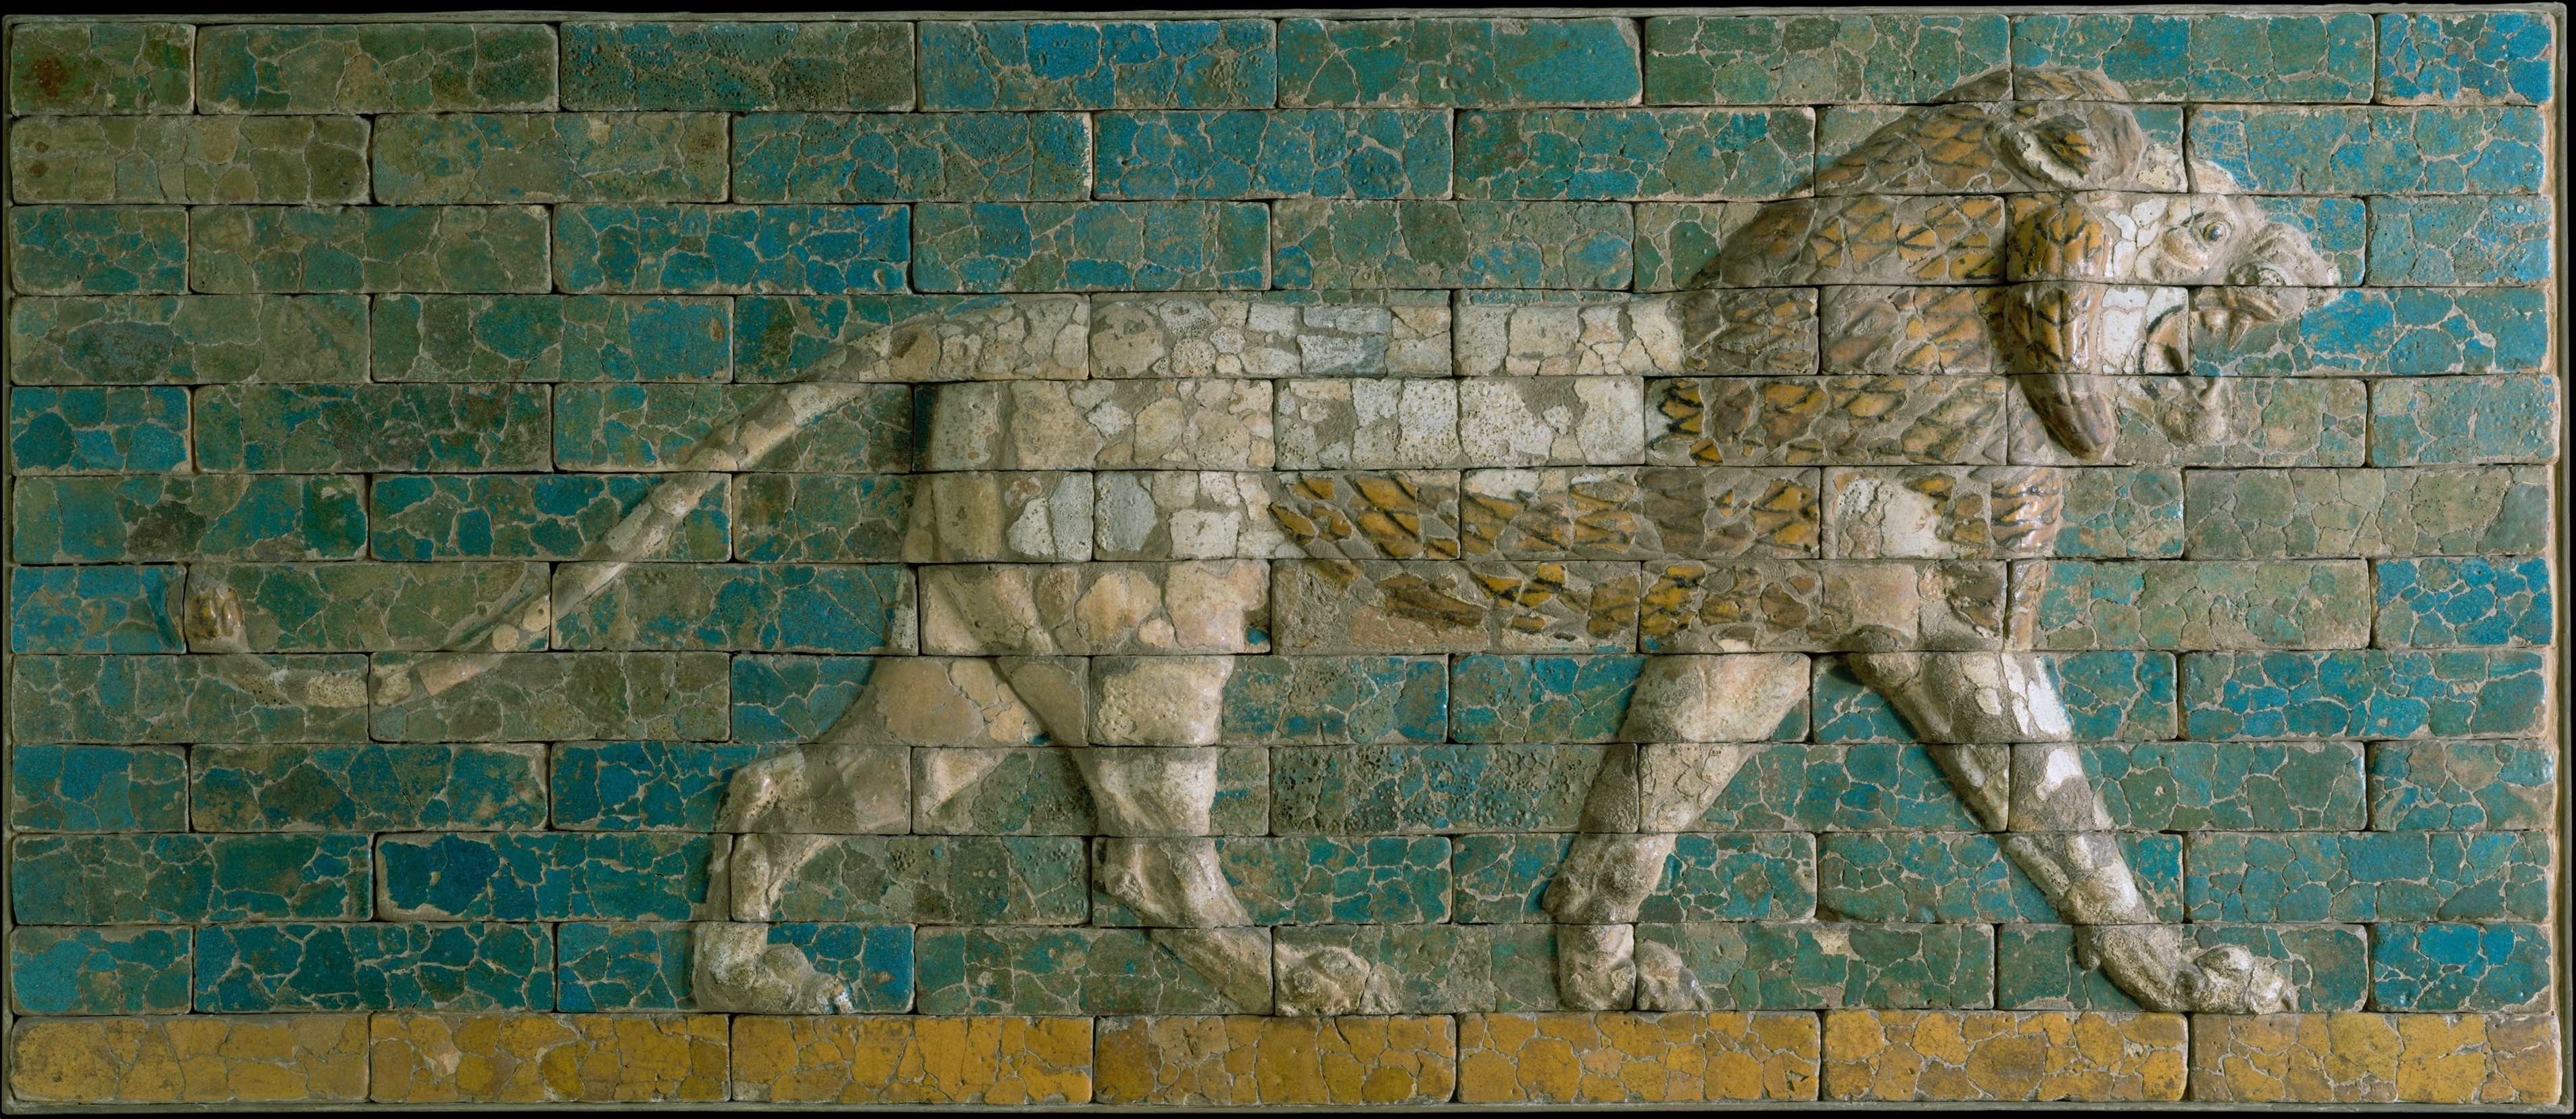 Glazed ceramic brick lion walking with its mouth open and teeth bared, from an excavated site in the ancient city of Babylon.